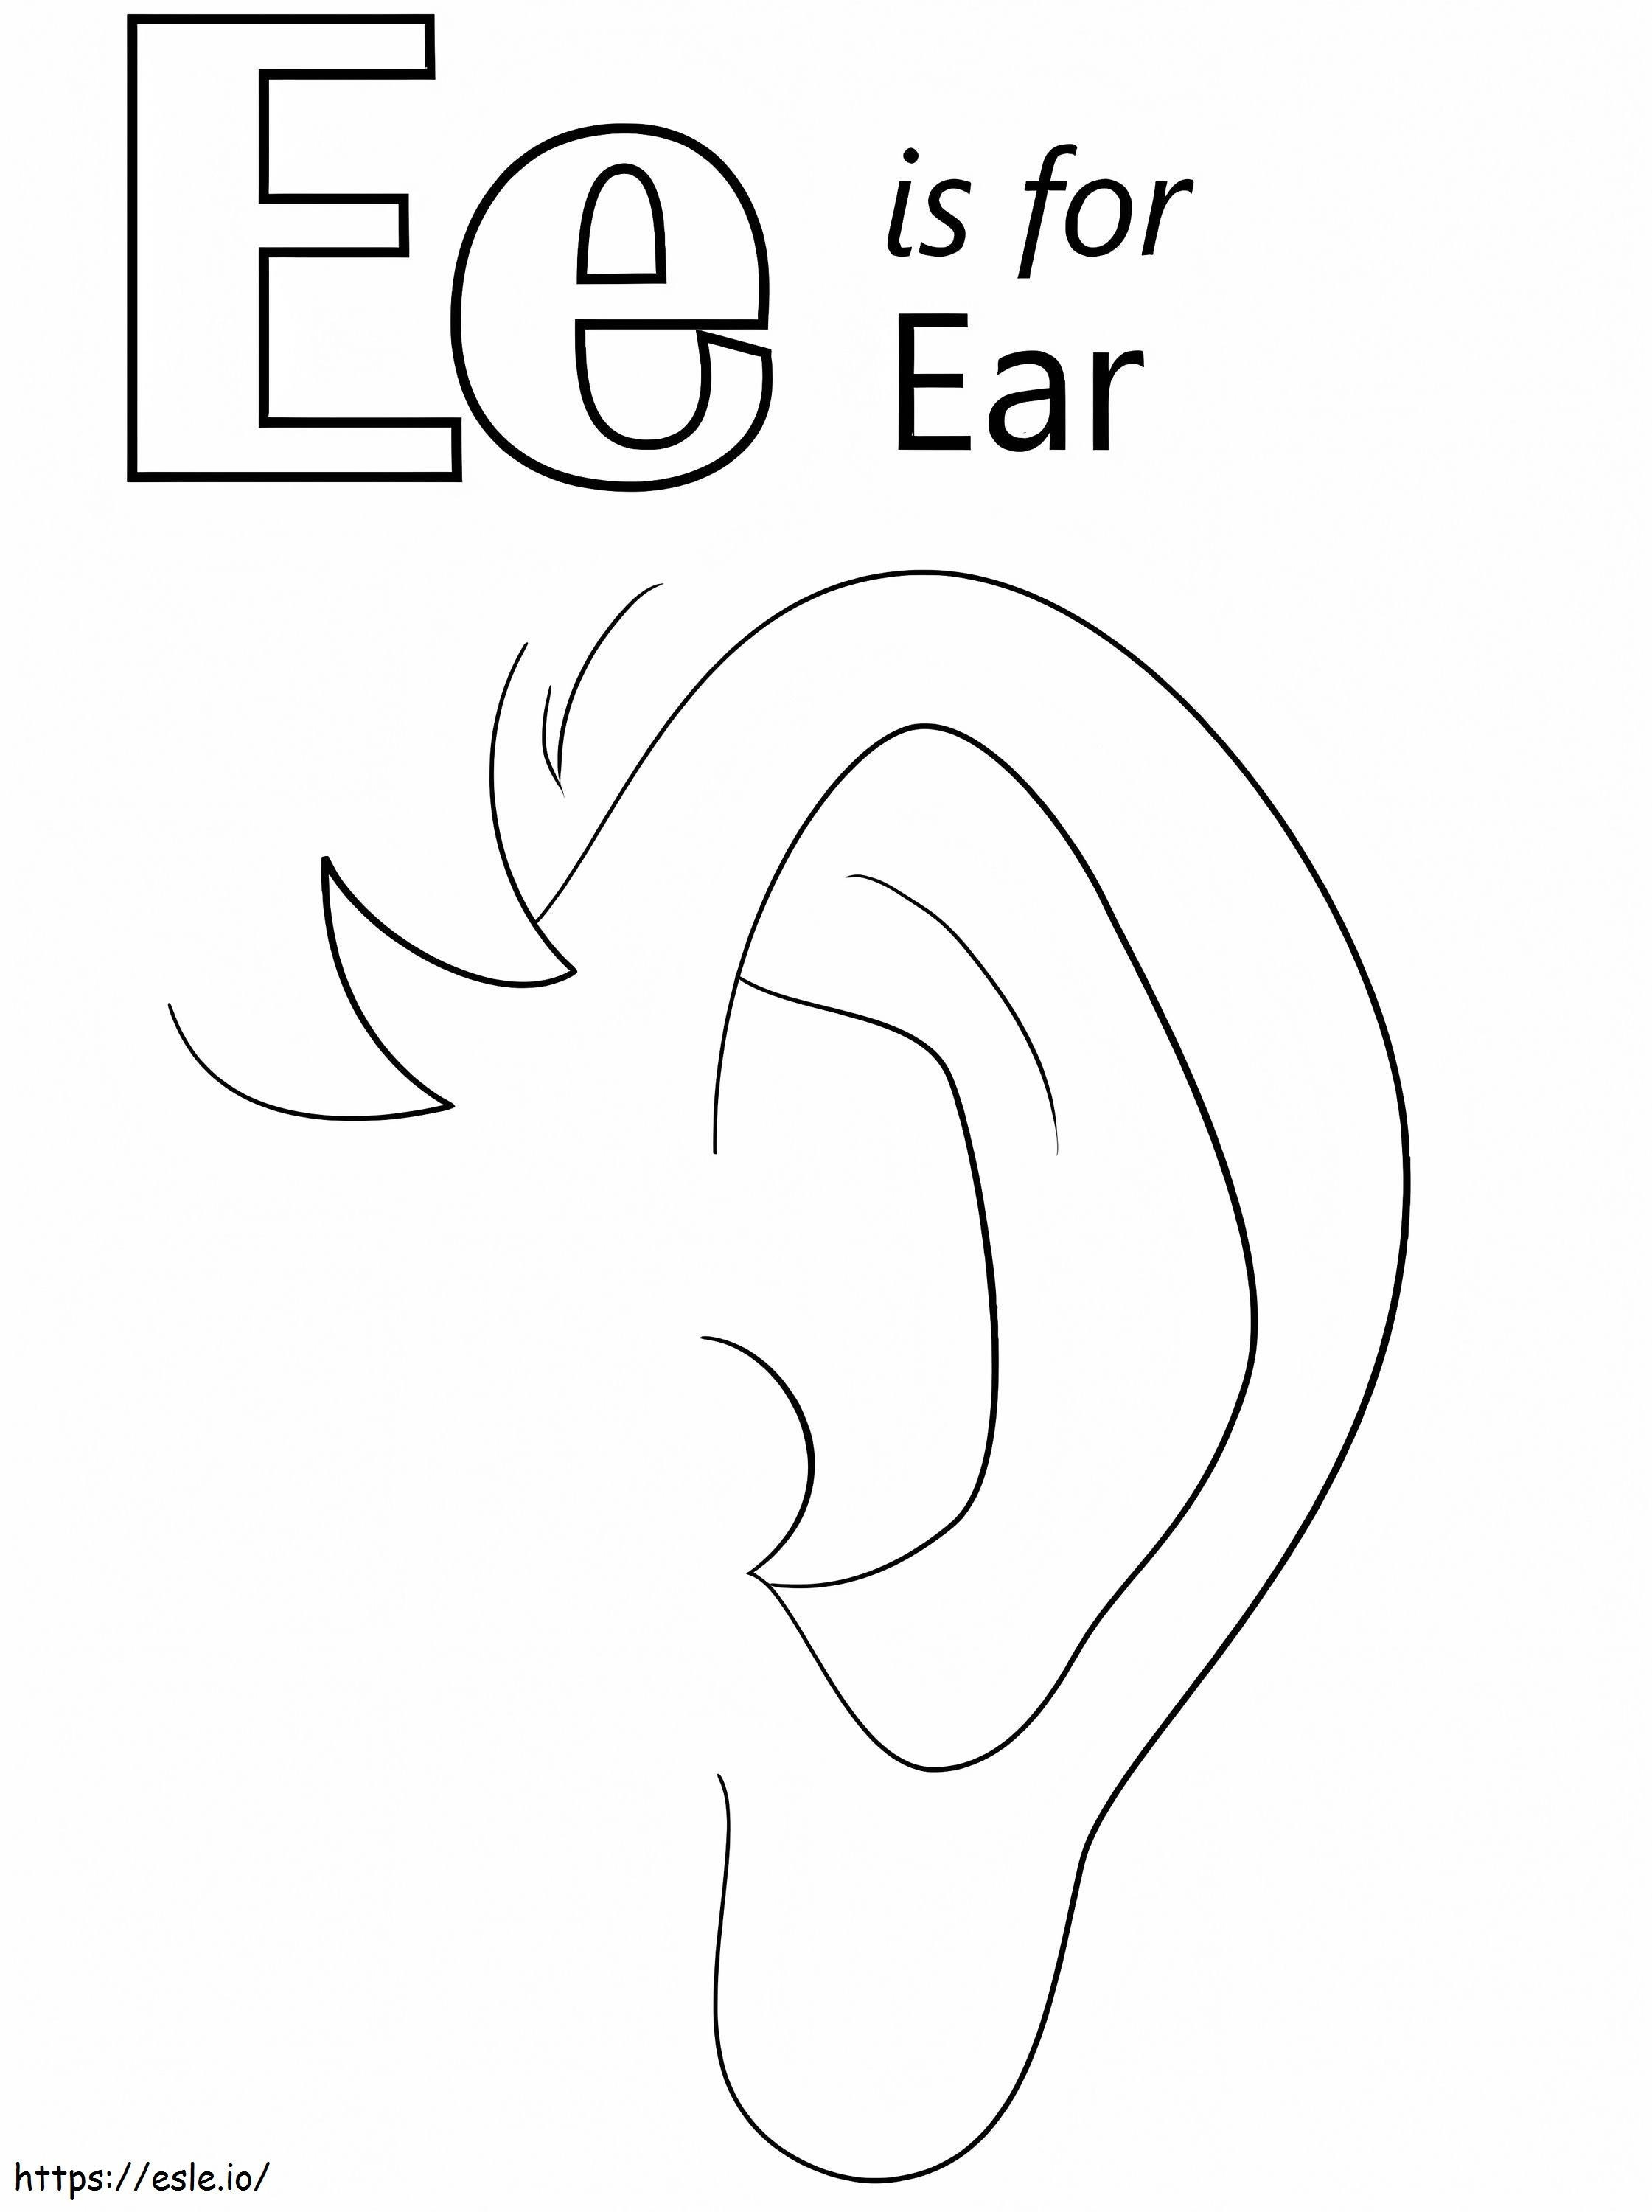 Ear Letter E coloring page